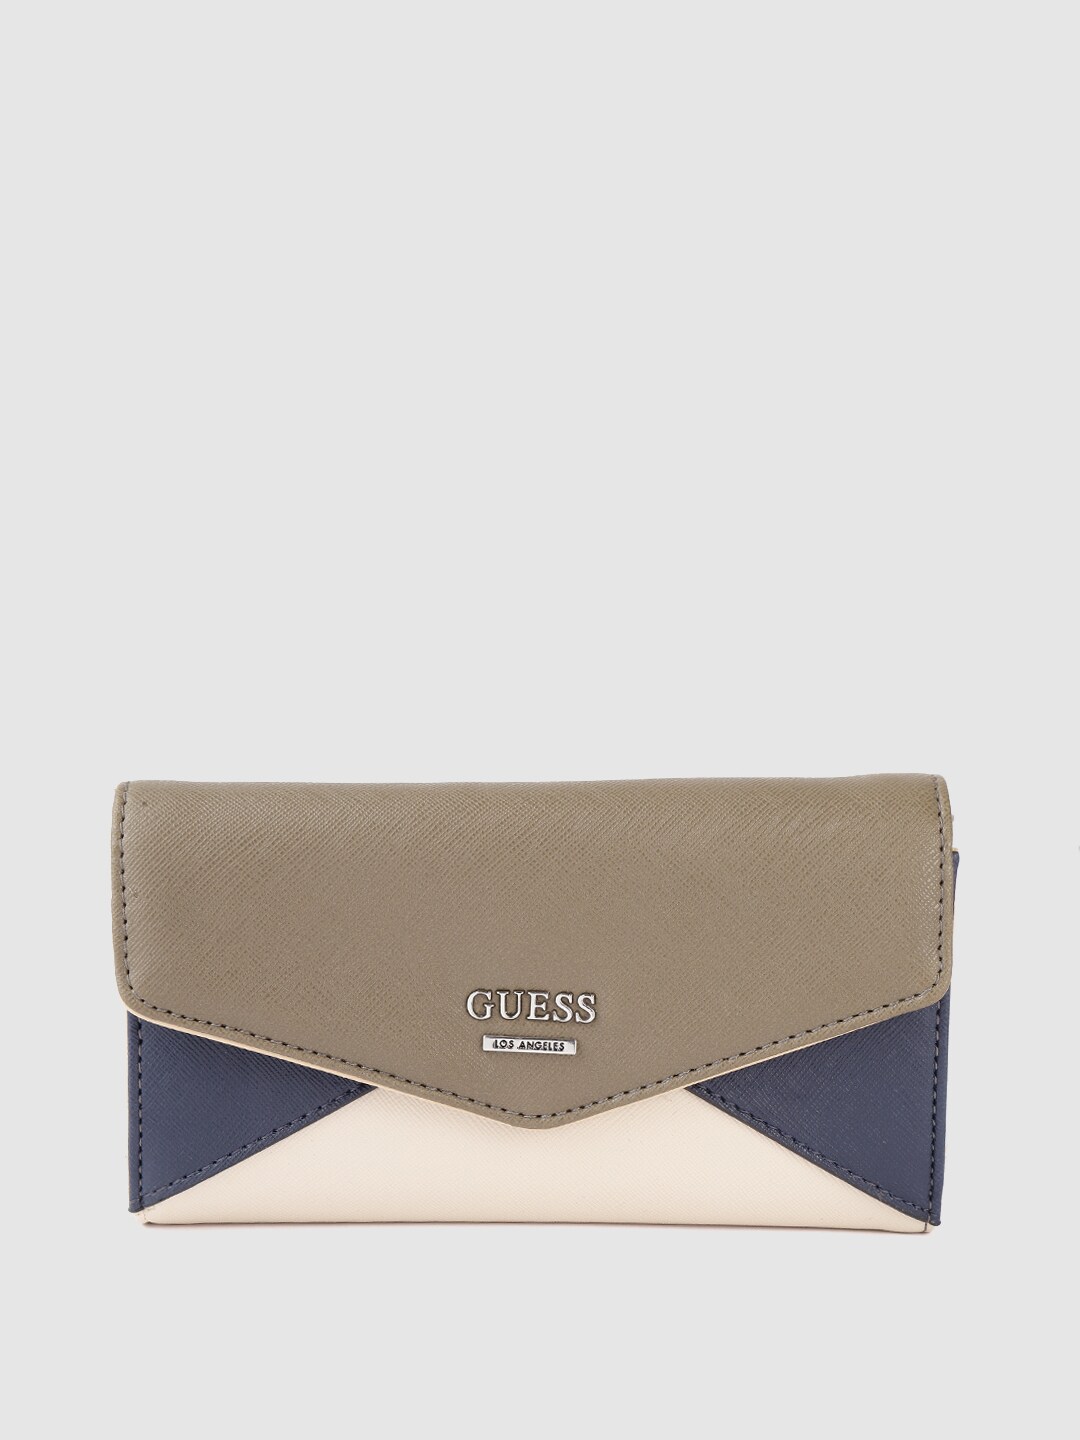 GUESS Women Olive Green & Navy Blue Colourblocked Saffiano Textured Three Fold Wallet Price in India